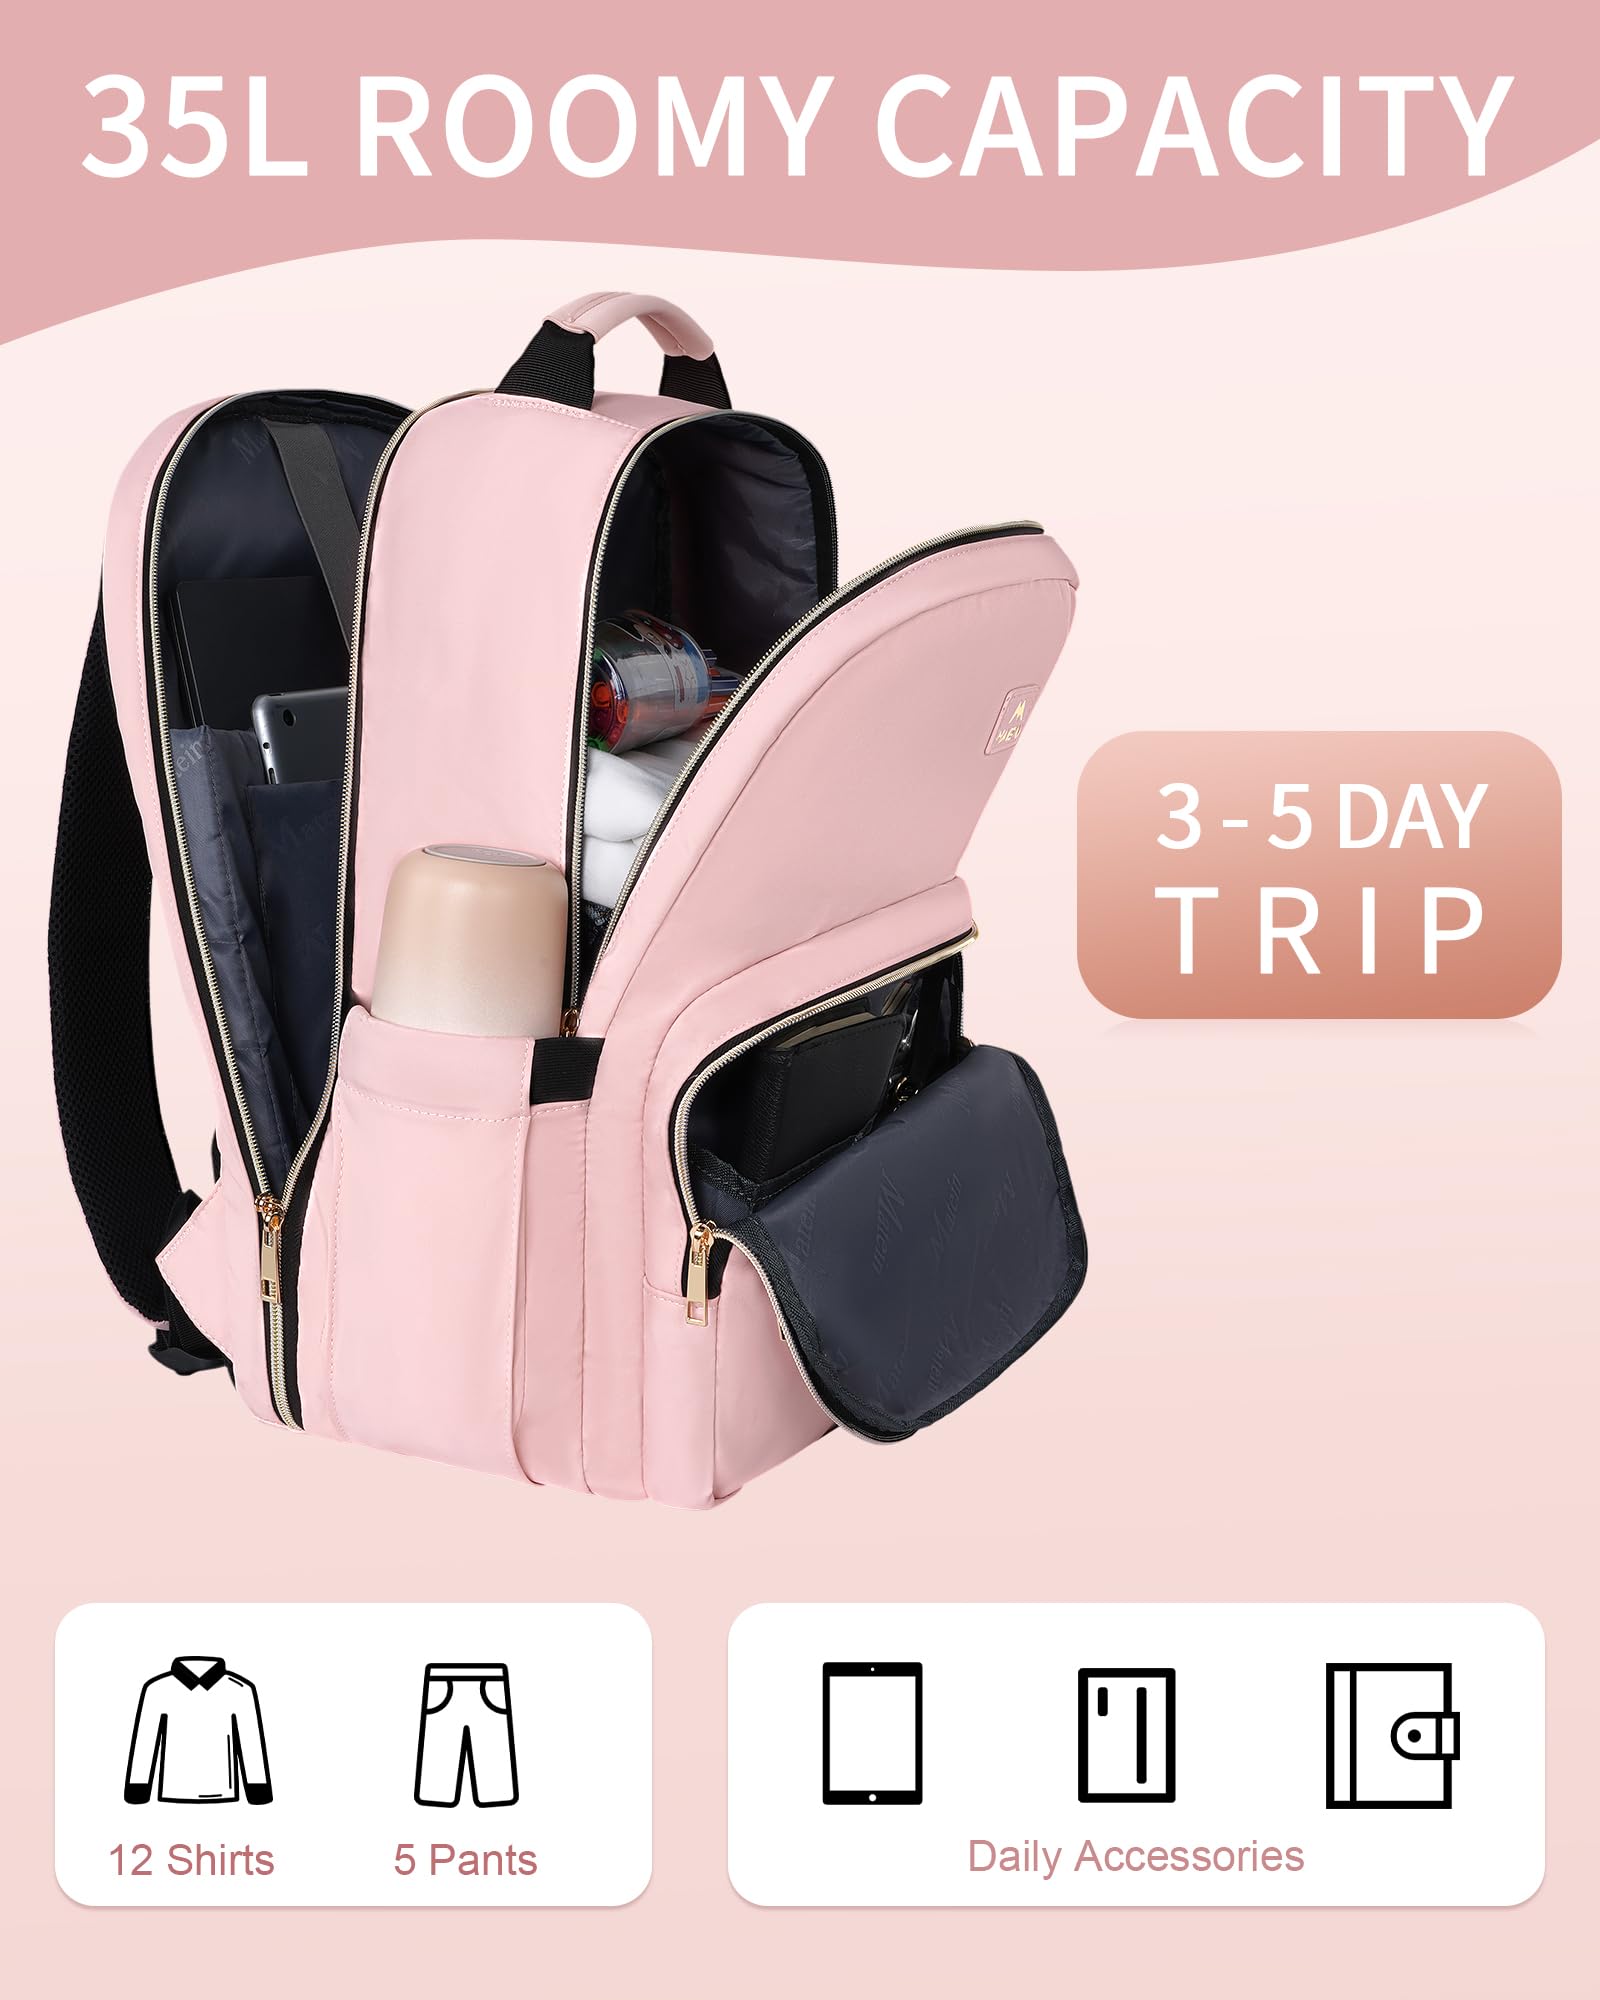 MATEIN Extra Large Laptop Backpack Women 17 inch, Pink Travel Backpacks for Women Airline Approved with USB Charging Port & Luggage Strap, Water Resistant Computer Bag for Personal item Nurse Work